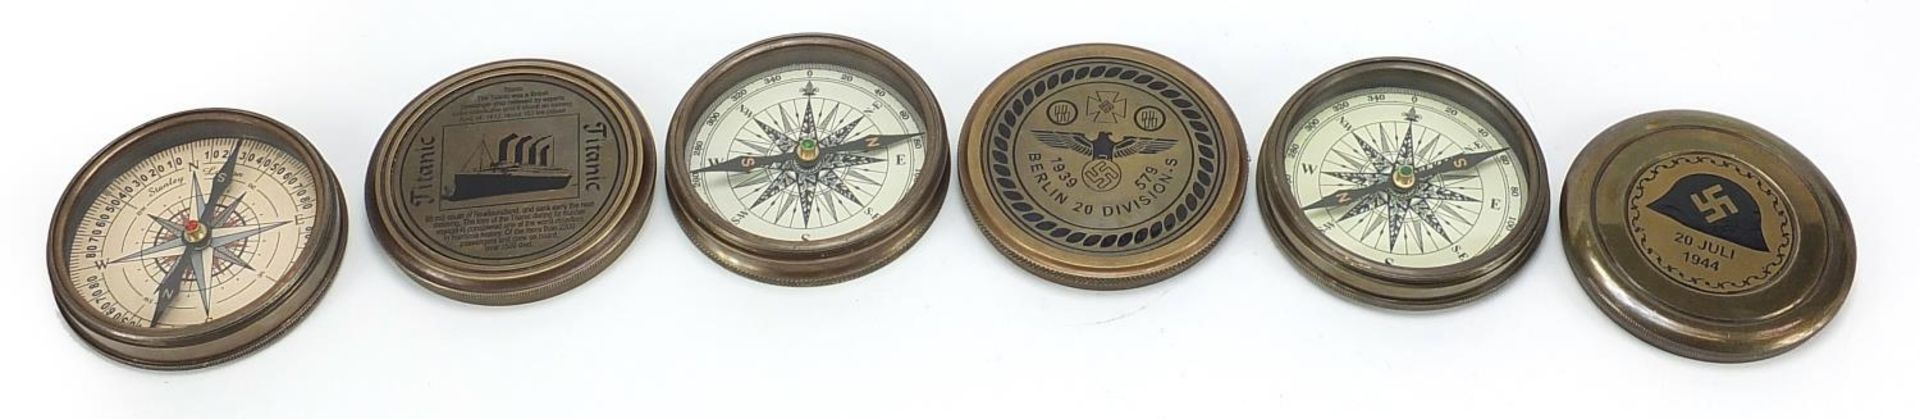 Three naval interest brass compasses including two German style examples, each 7.5cm in diameter